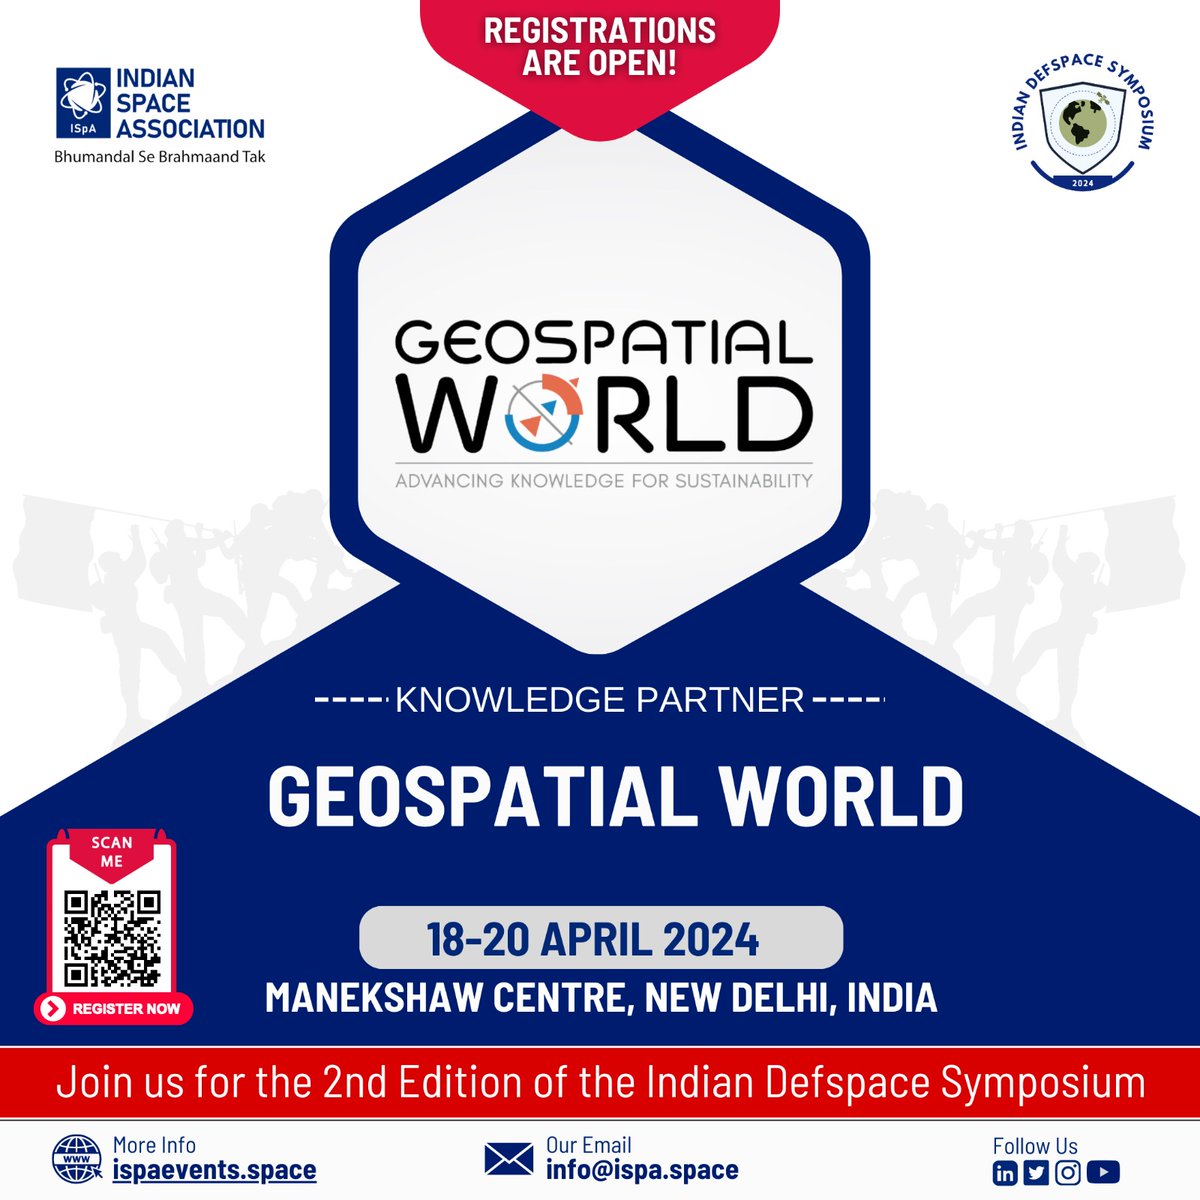 ISpA- Indian Space Association Welcome @geoworldmedia as a Knowledge partner for the Indian DefSpace Symposium 2024, 18-20 April, Manekshaw Centre, New Delhi, India. For registration, Scan the QR code or visit ispaevents.space.